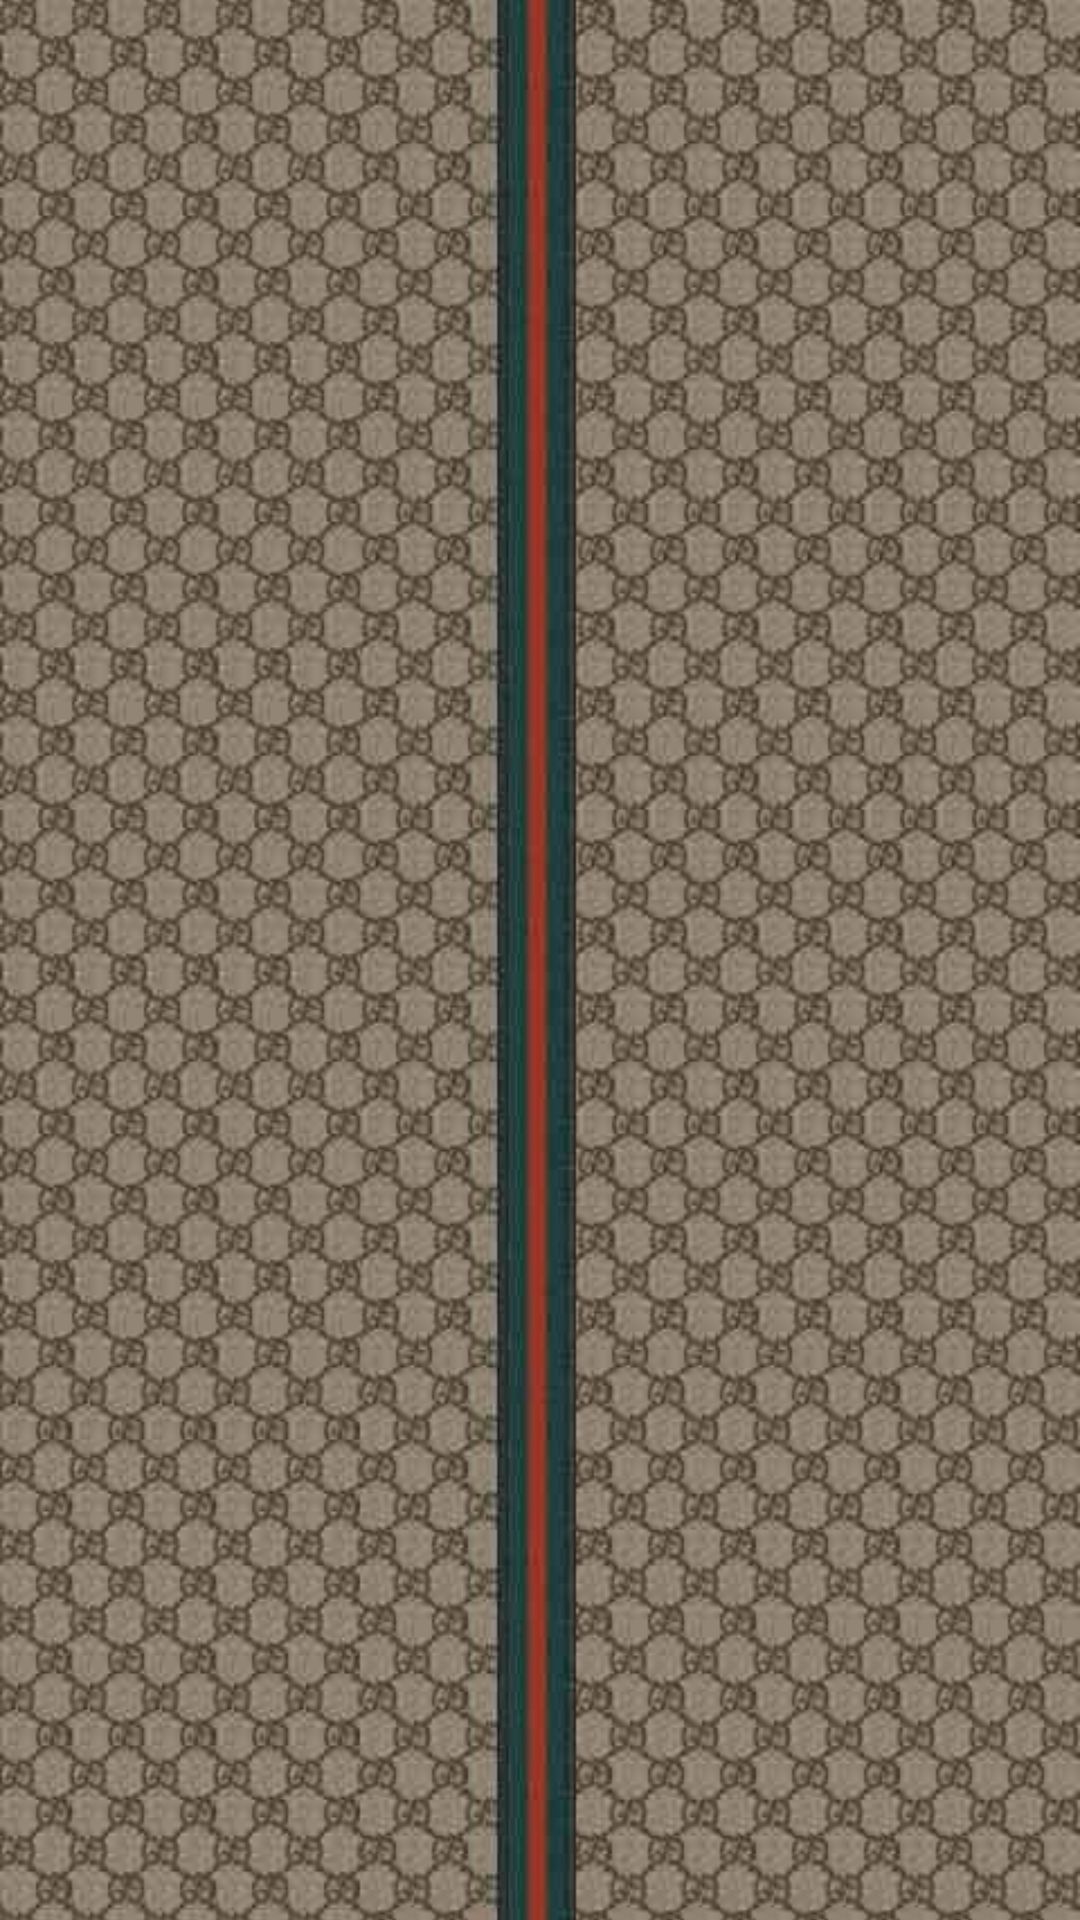 Gucci Wallpaper Discover more Background, cool, Gold, Iphone, Lock